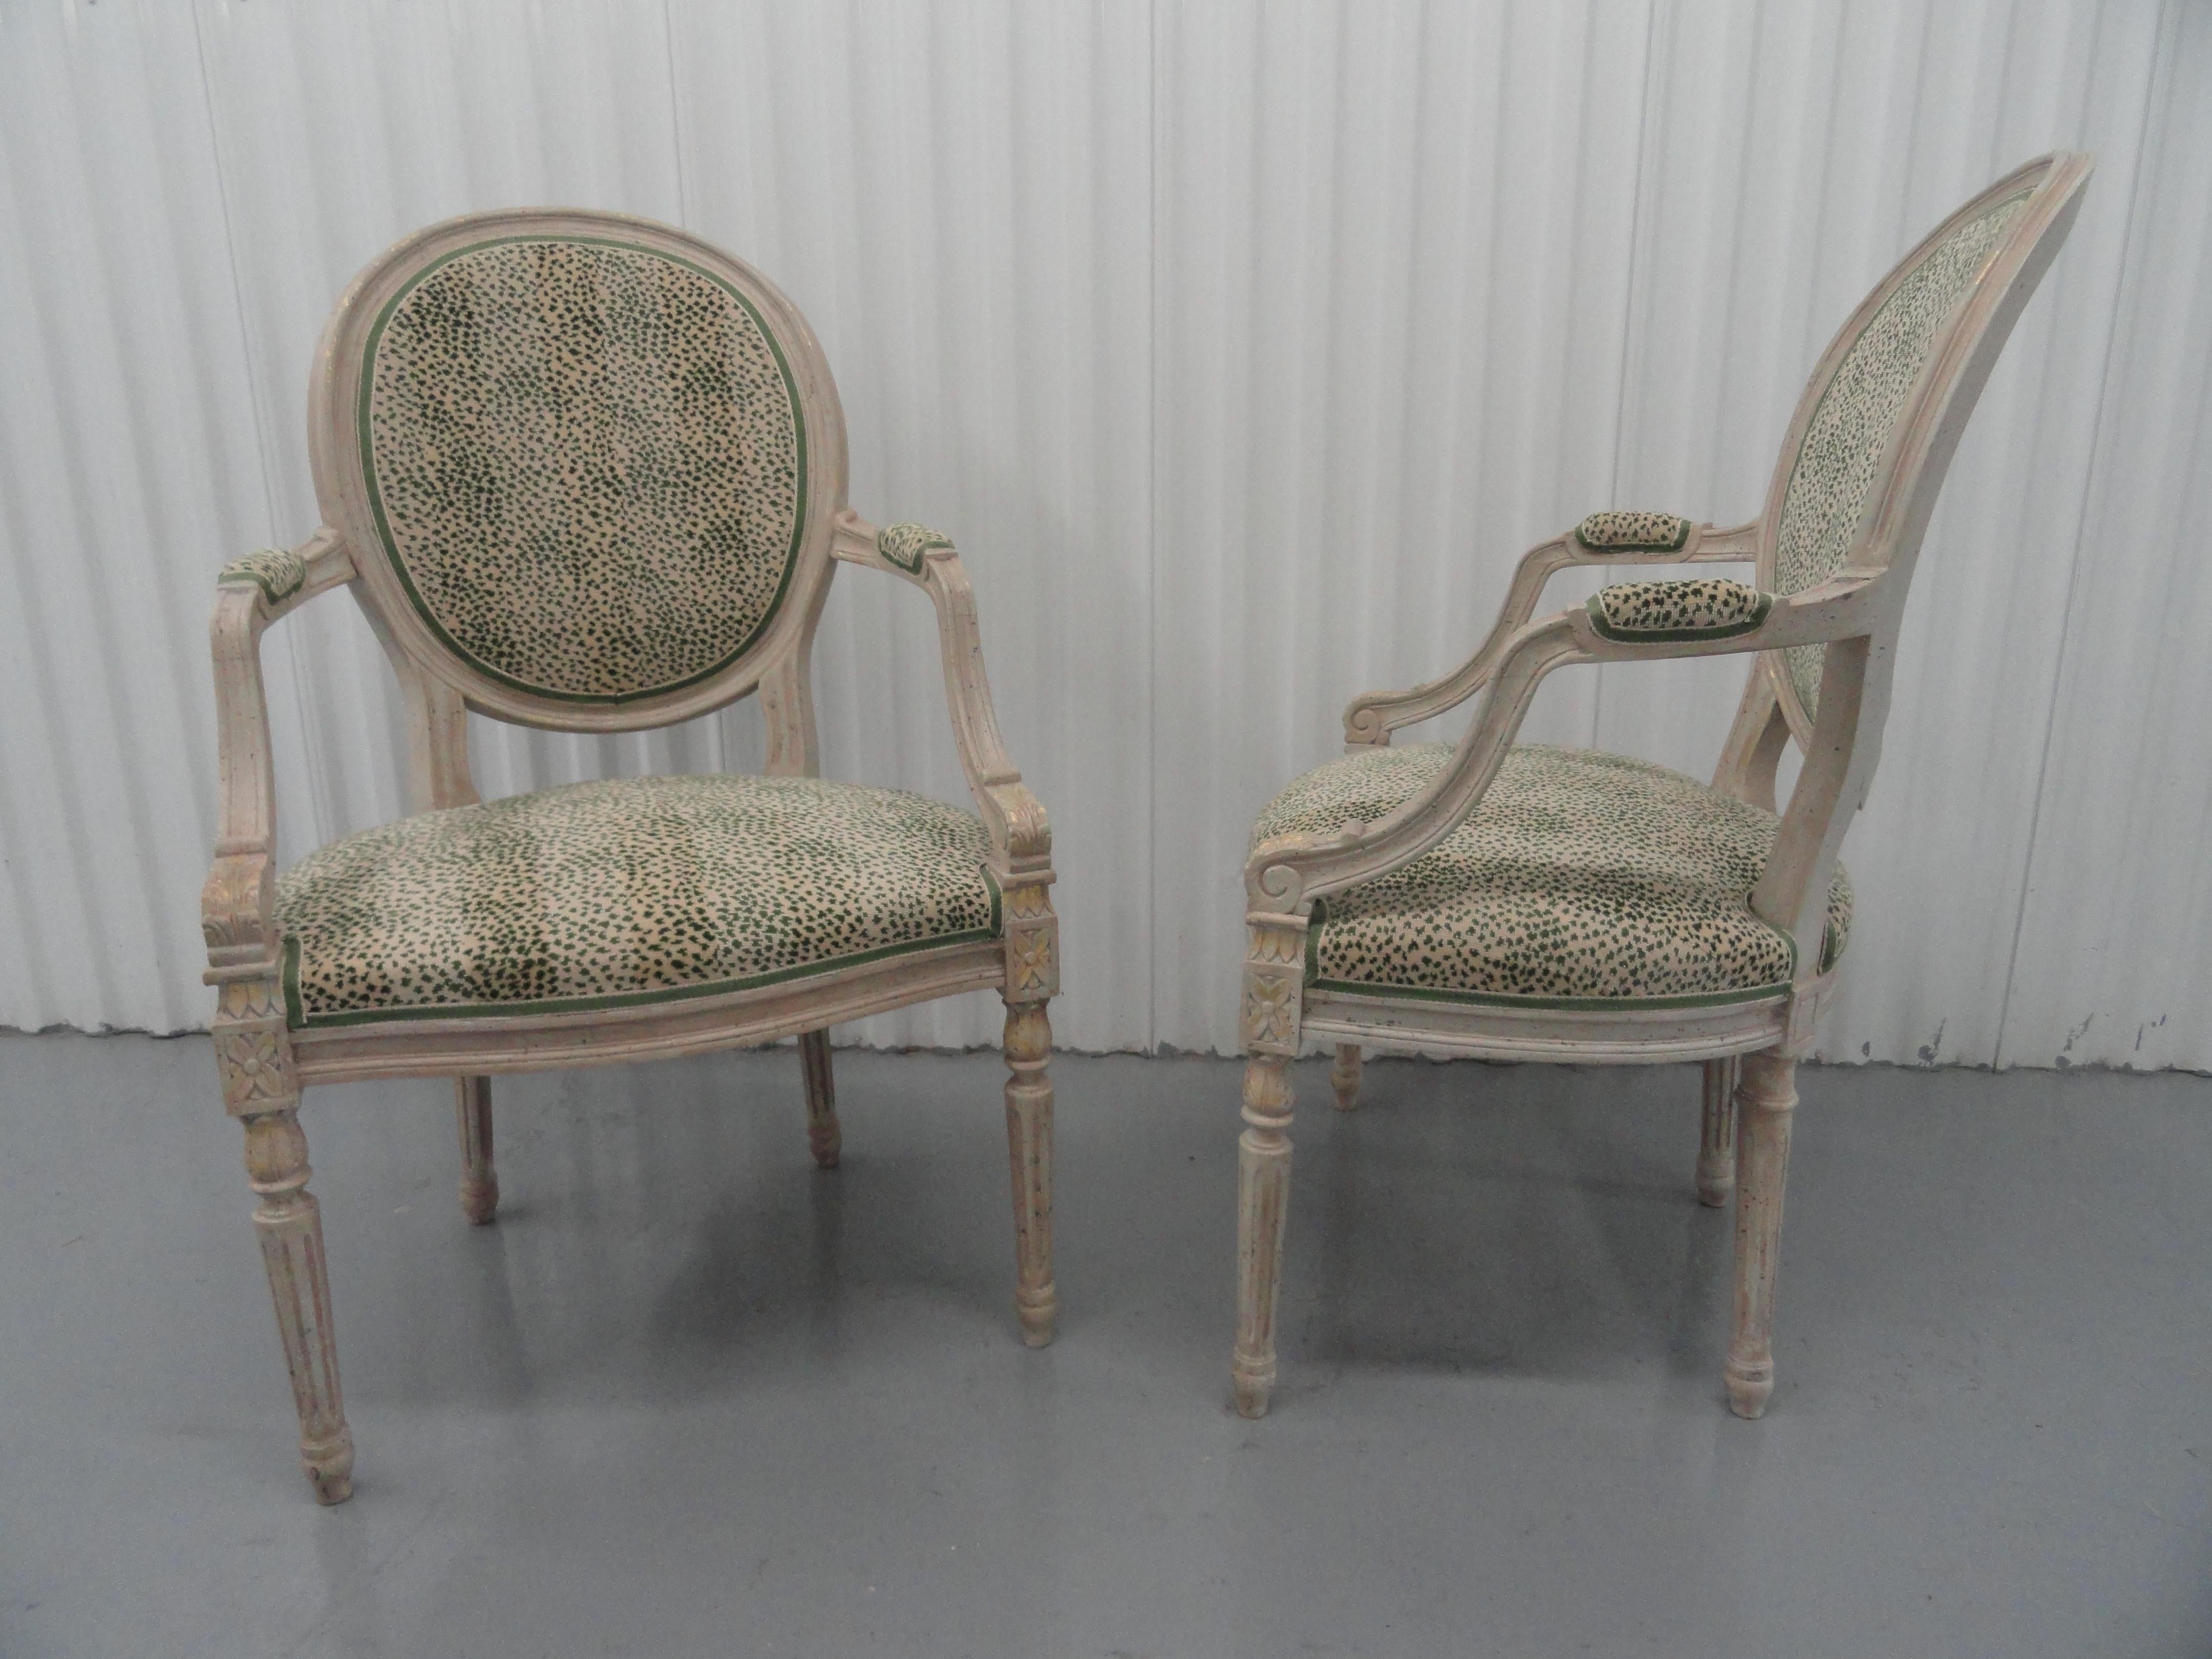 Pair of Adams-style chairs with a white distressed painted finish with gold detail. Chairs are upholstered in a Clarence House cotton.
Mid-20th century. Excellent condition.